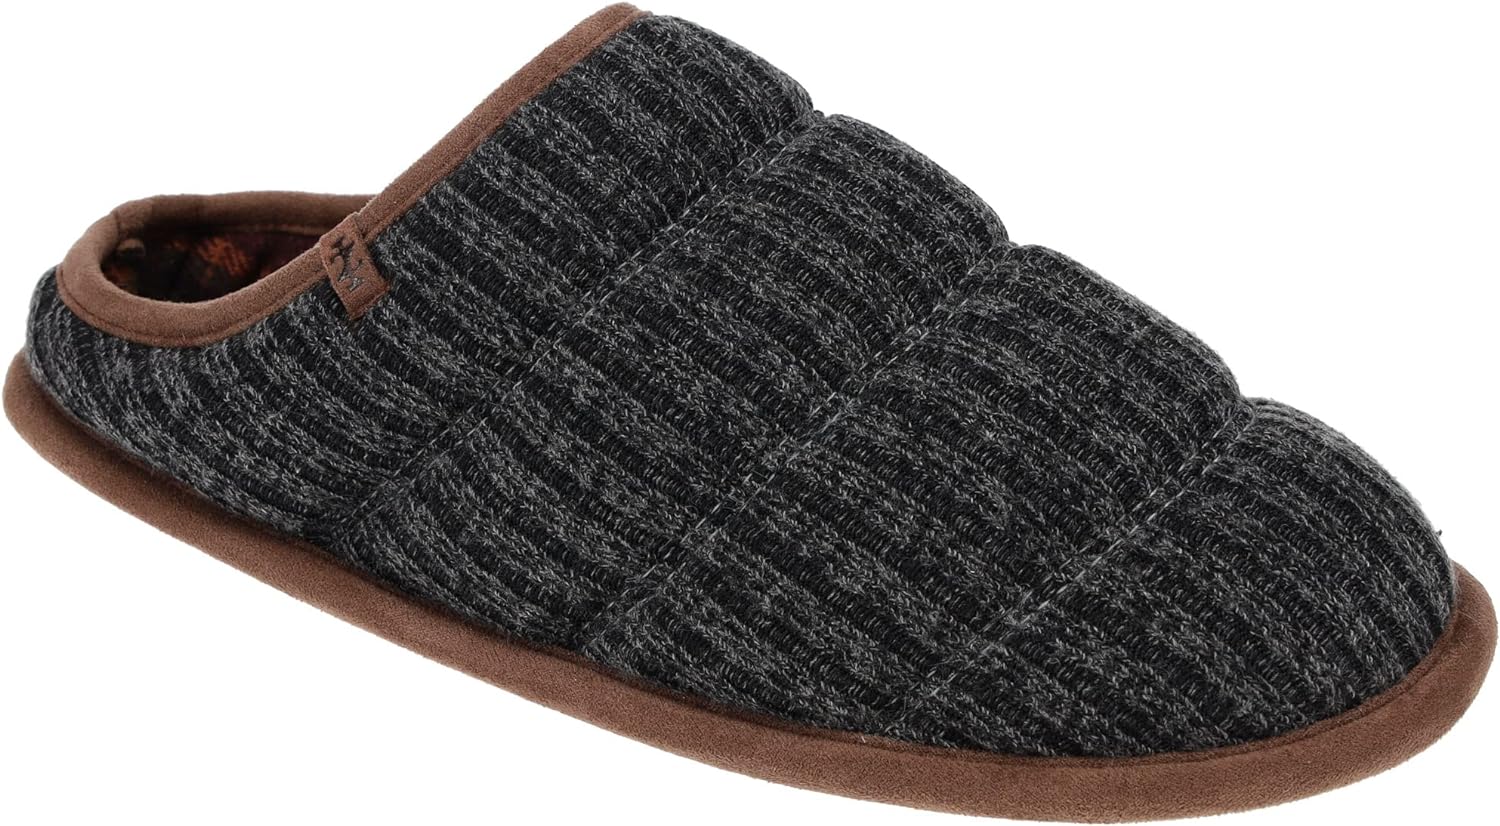 IZOD Mens Clog Slipper with Plaid Lining, Black and Navy, Size Medium to XXL (Mens 8-9 to 13)